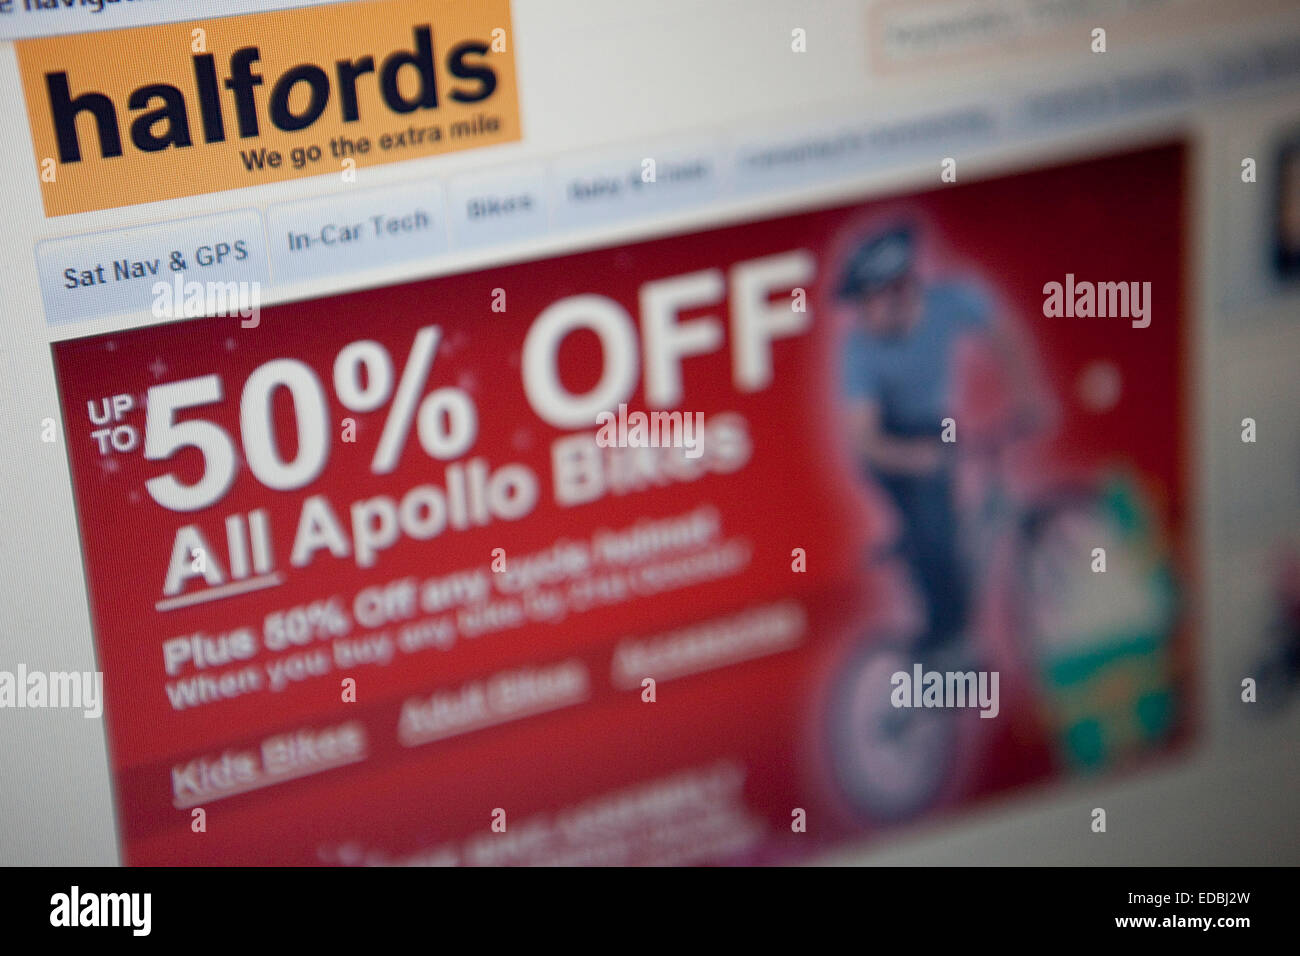 The Halfords website. Stock Photo